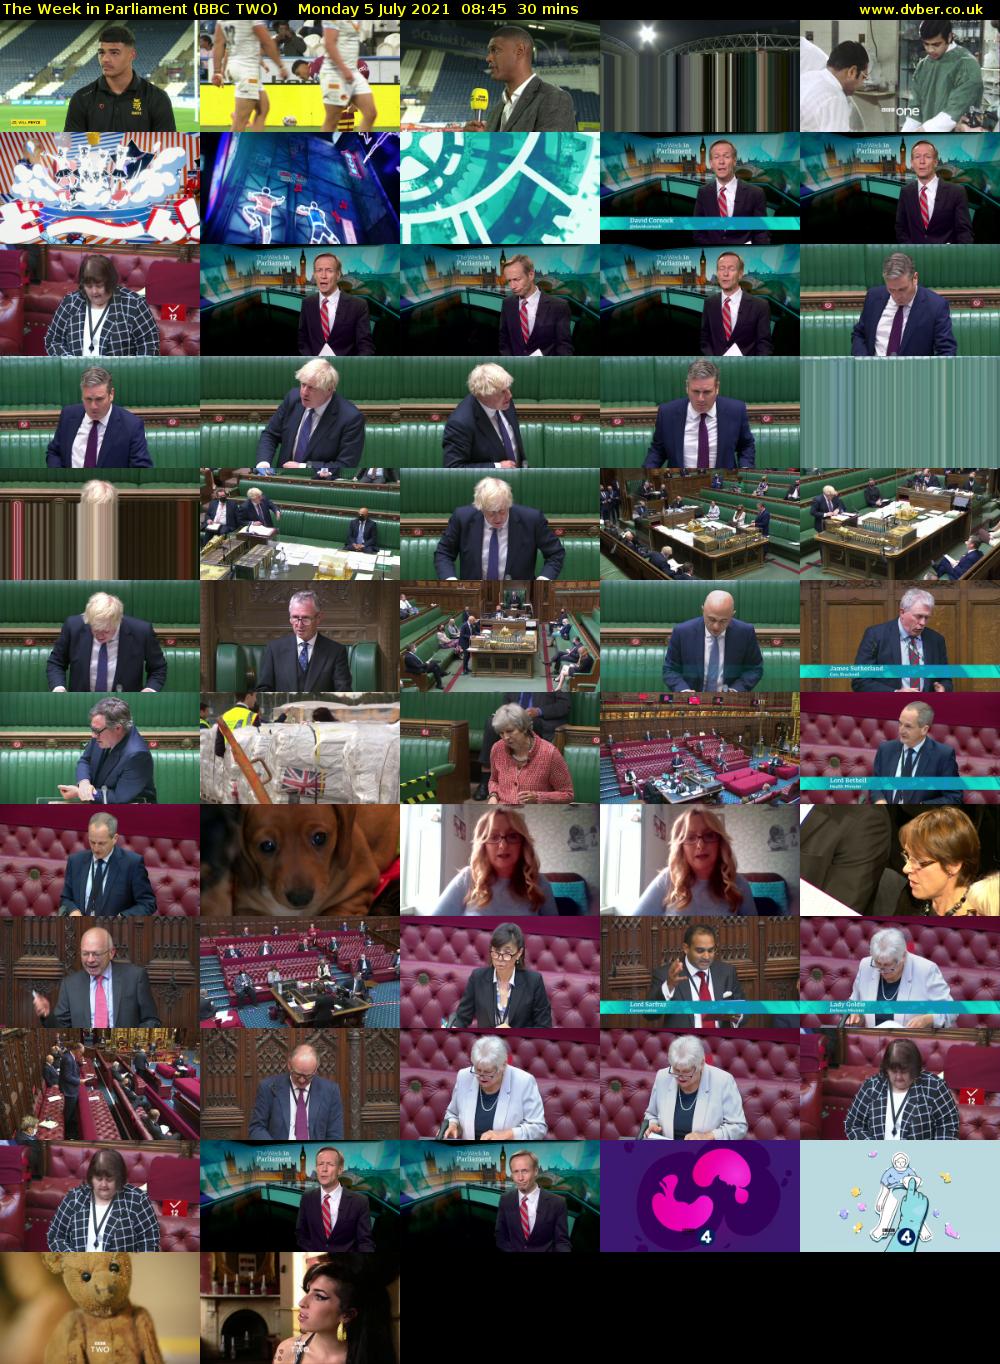 The Week in Parliament (BBC TWO) Monday 5 July 2021 08:45 - 09:15